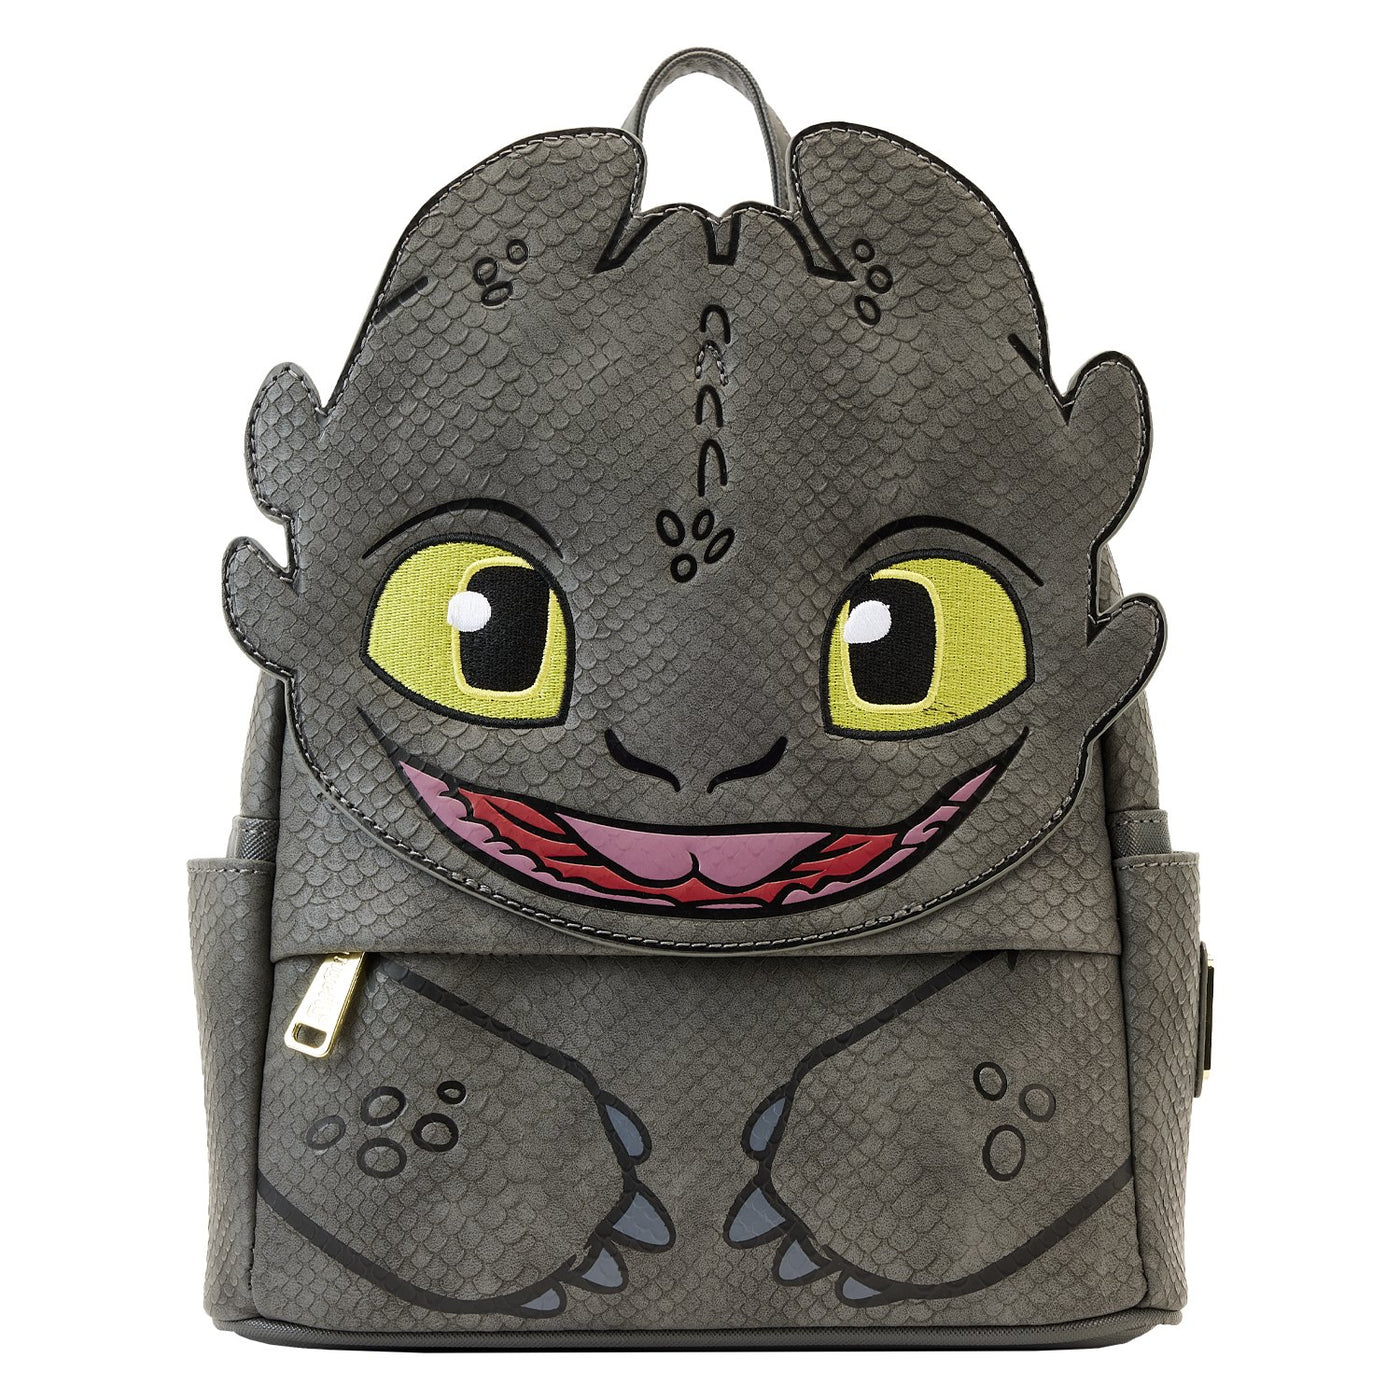 671803392670 - Loungefly Dreamworks How to Train Your Dragon Toothless Cosplay Mini Backpack - Front